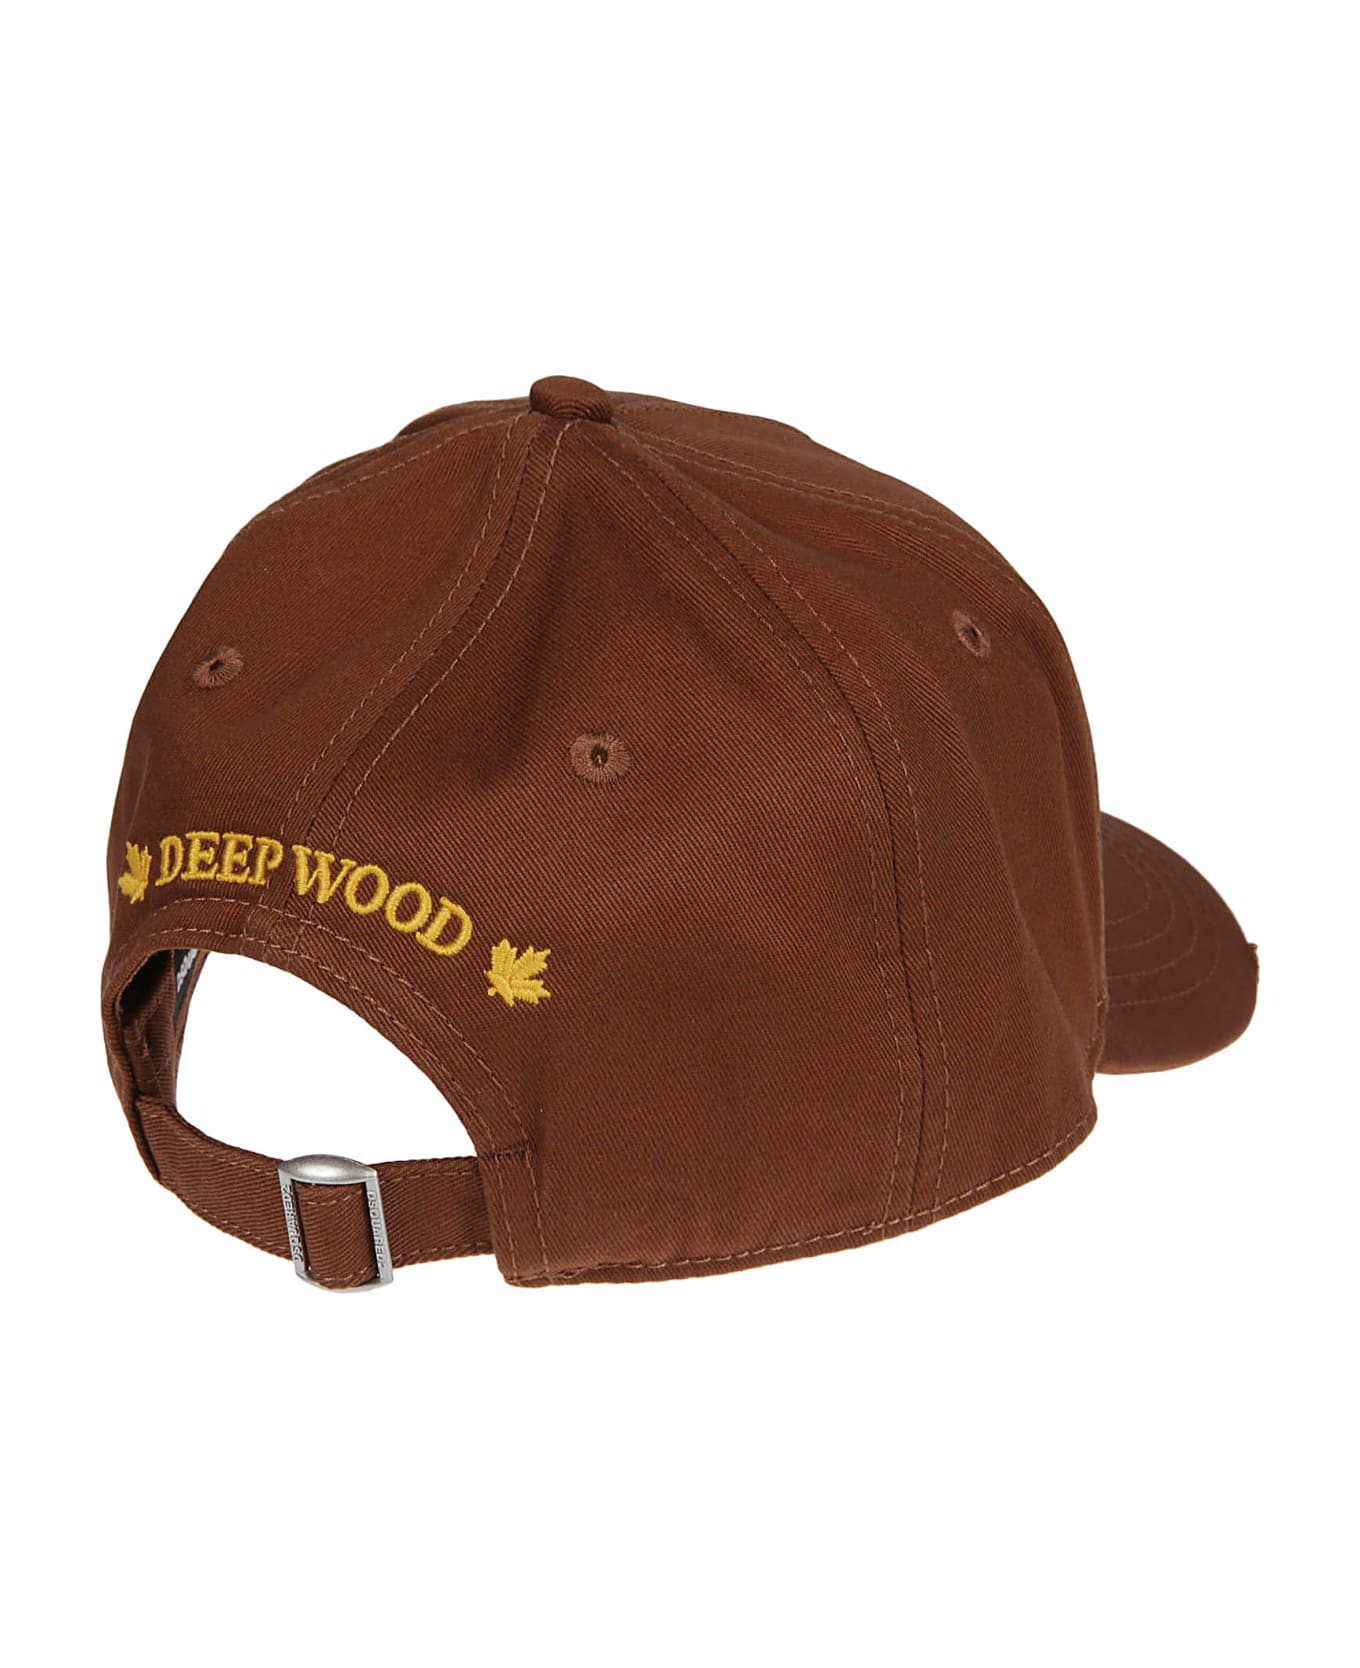 Dsquared2 Canadian Patch Baseball Hat - Sienna